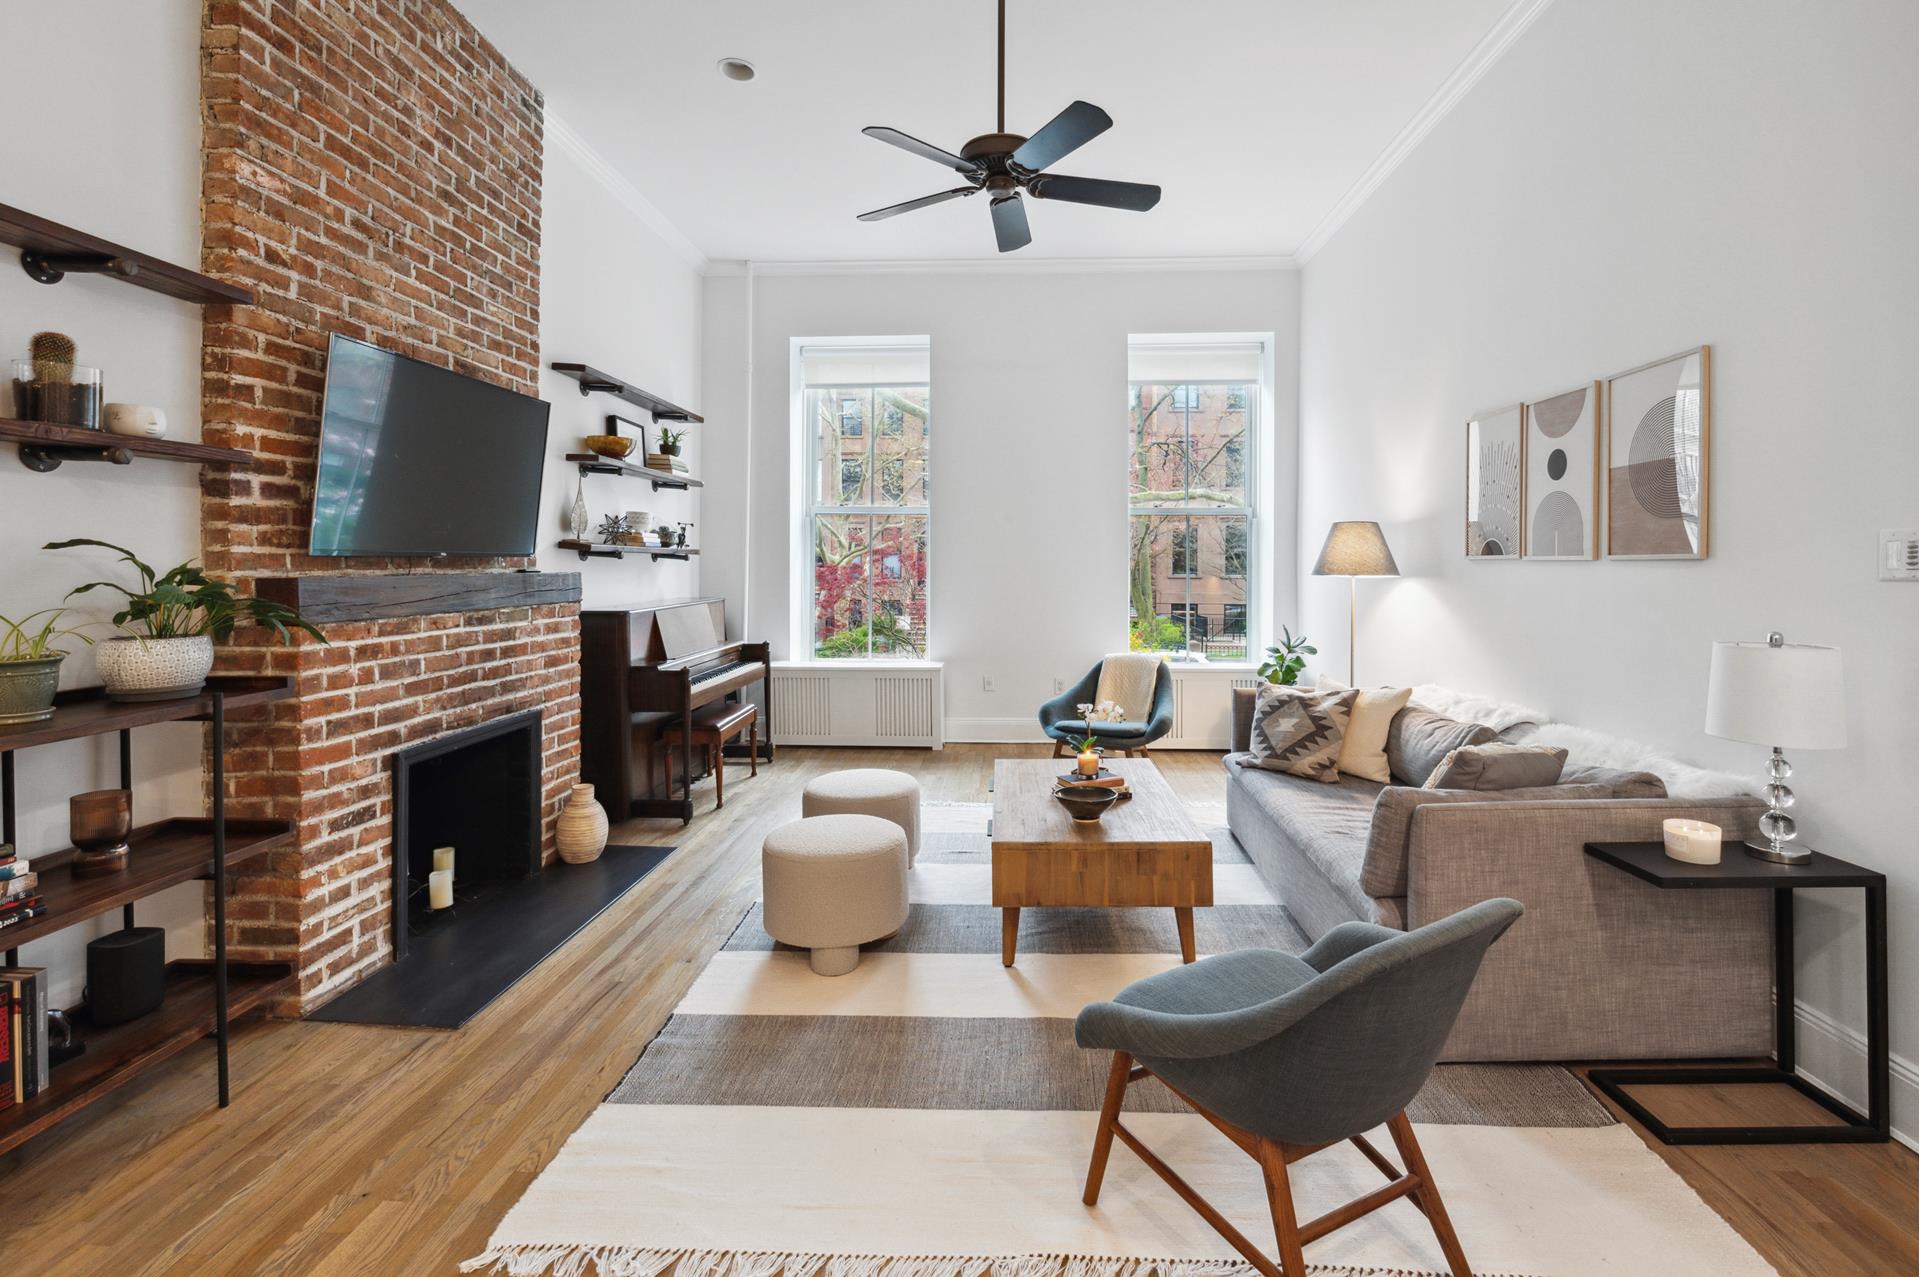 117 1st Place 2, Carroll Gardens, Brooklyn, New York - 3 Bedrooms  
2.5 Bathrooms  
7 Rooms - 